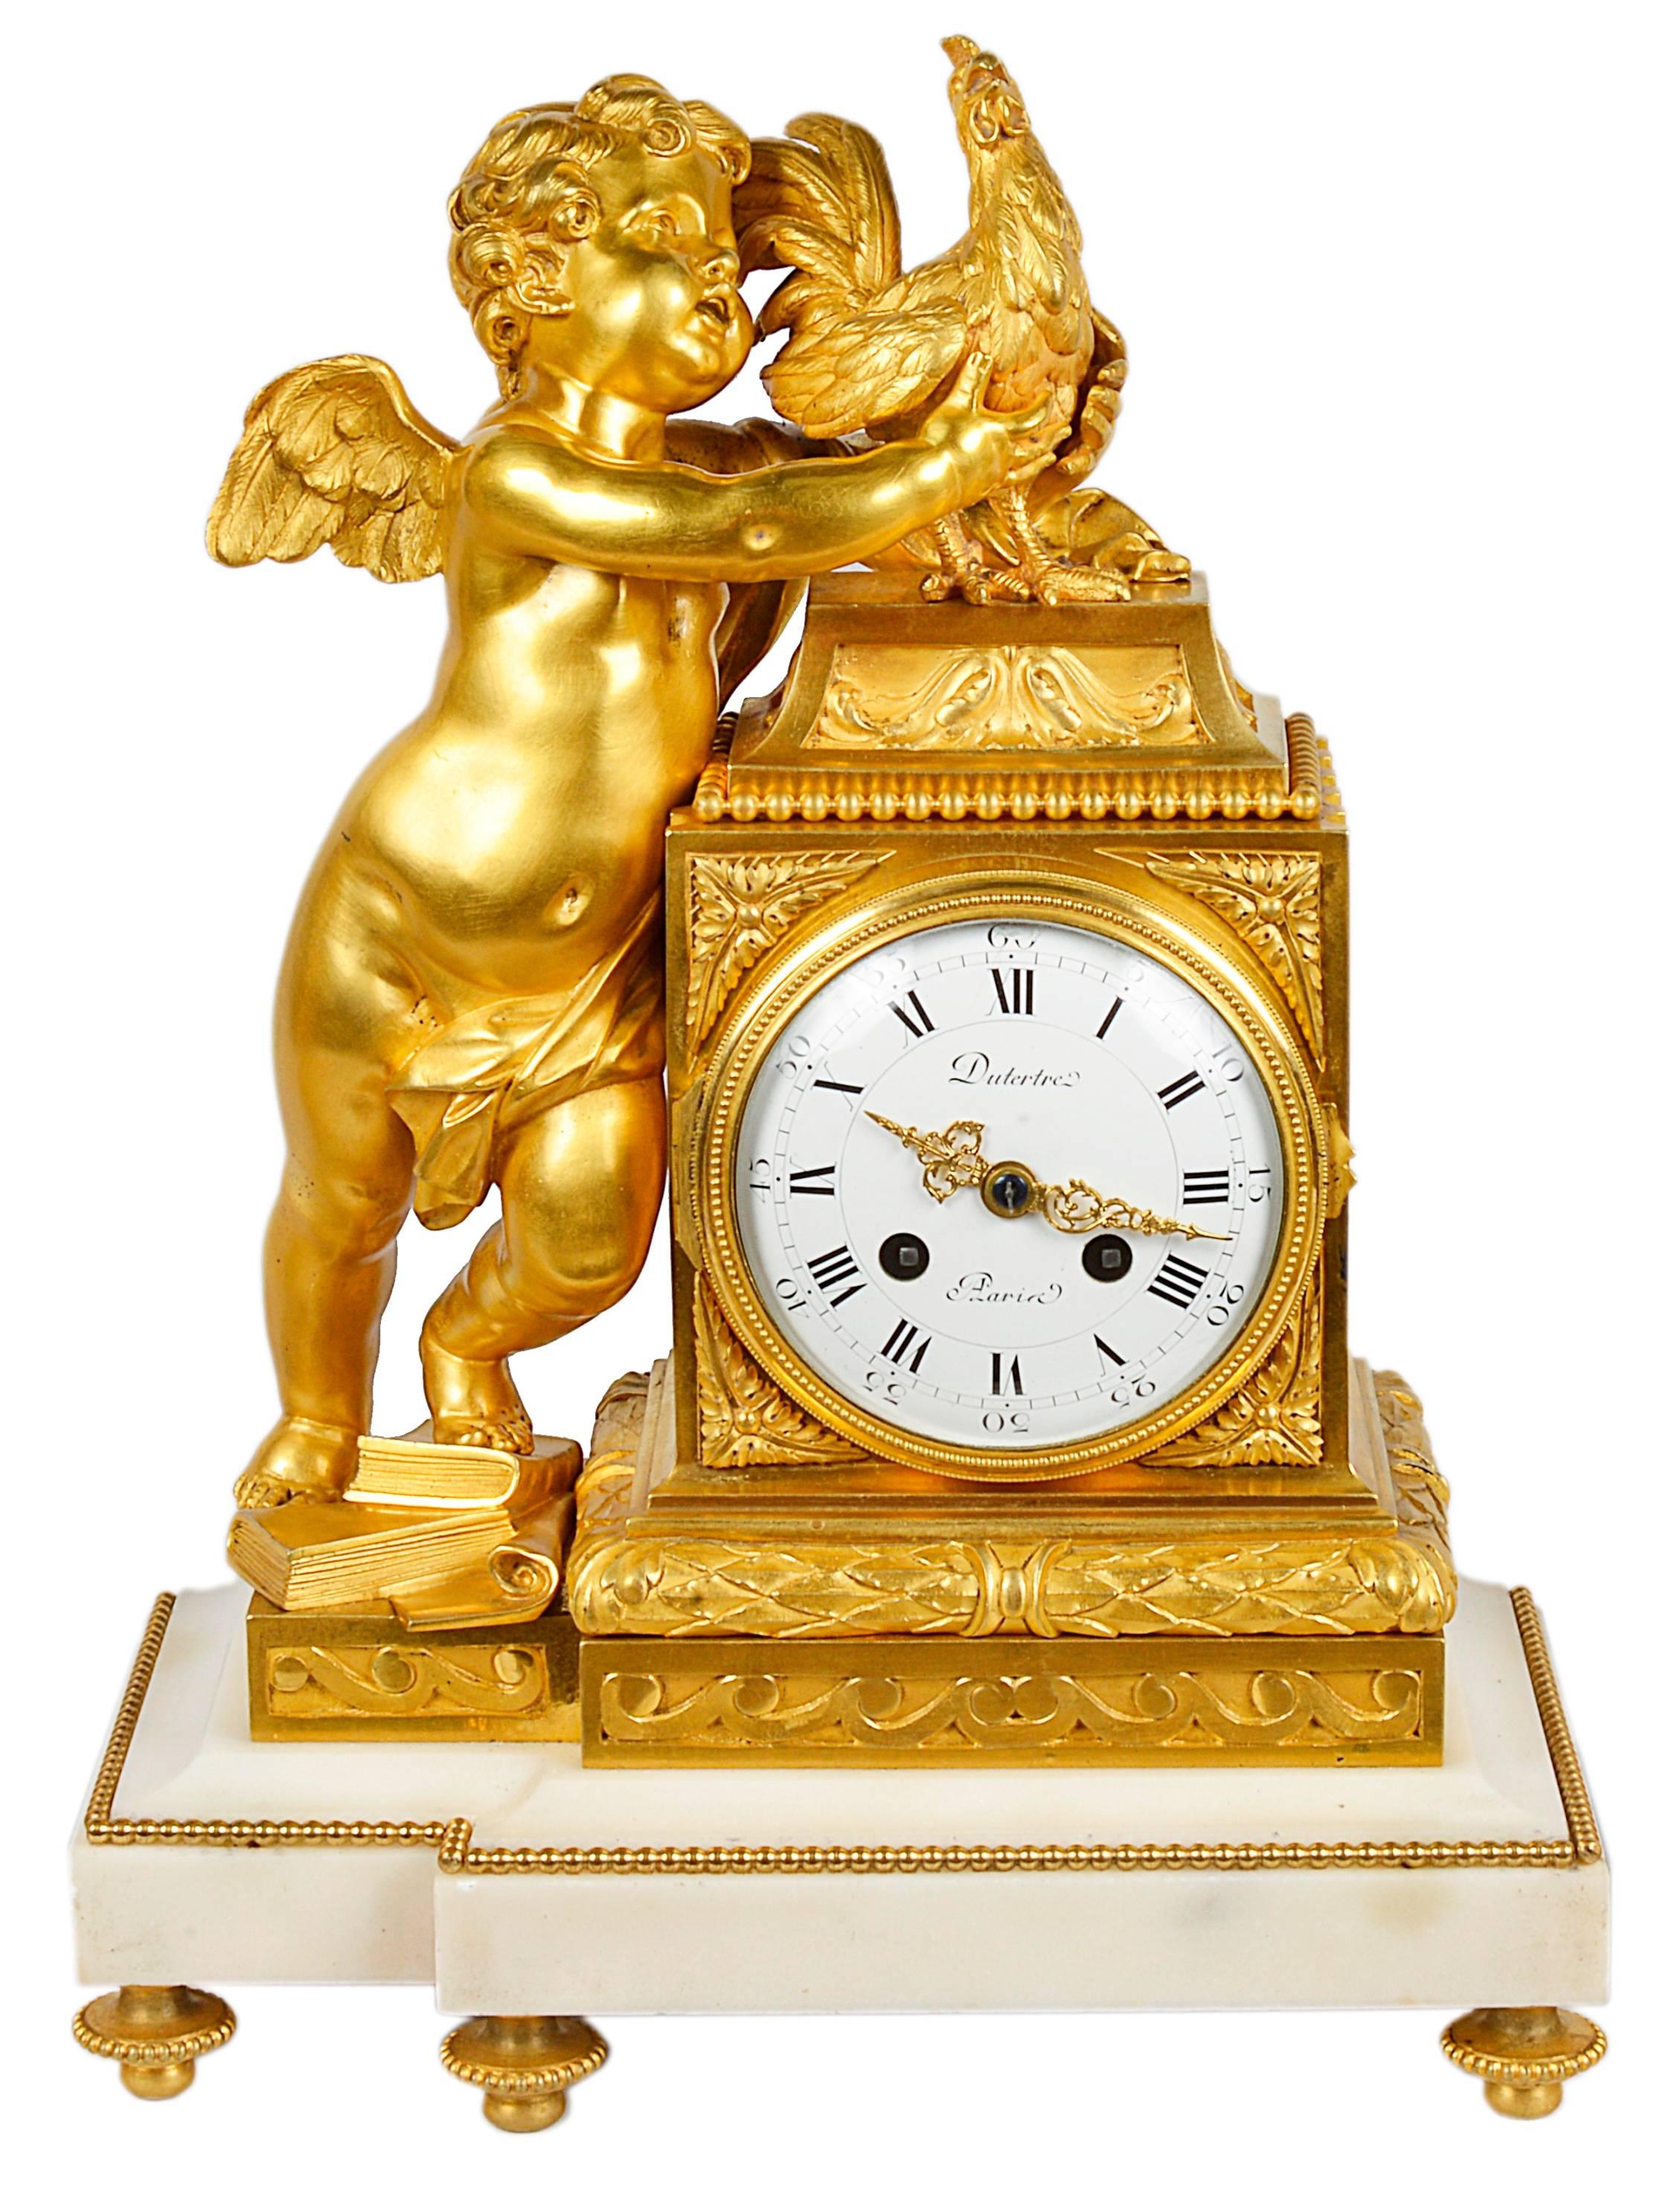 A very pleasing French gilded ormolu and white marble clock garniture in the Louis XVI style. The clock having a cherub holding a chicken, the white enamel clock face with an eight day striking movement, signed; Dutertre, Paris
The pair of four